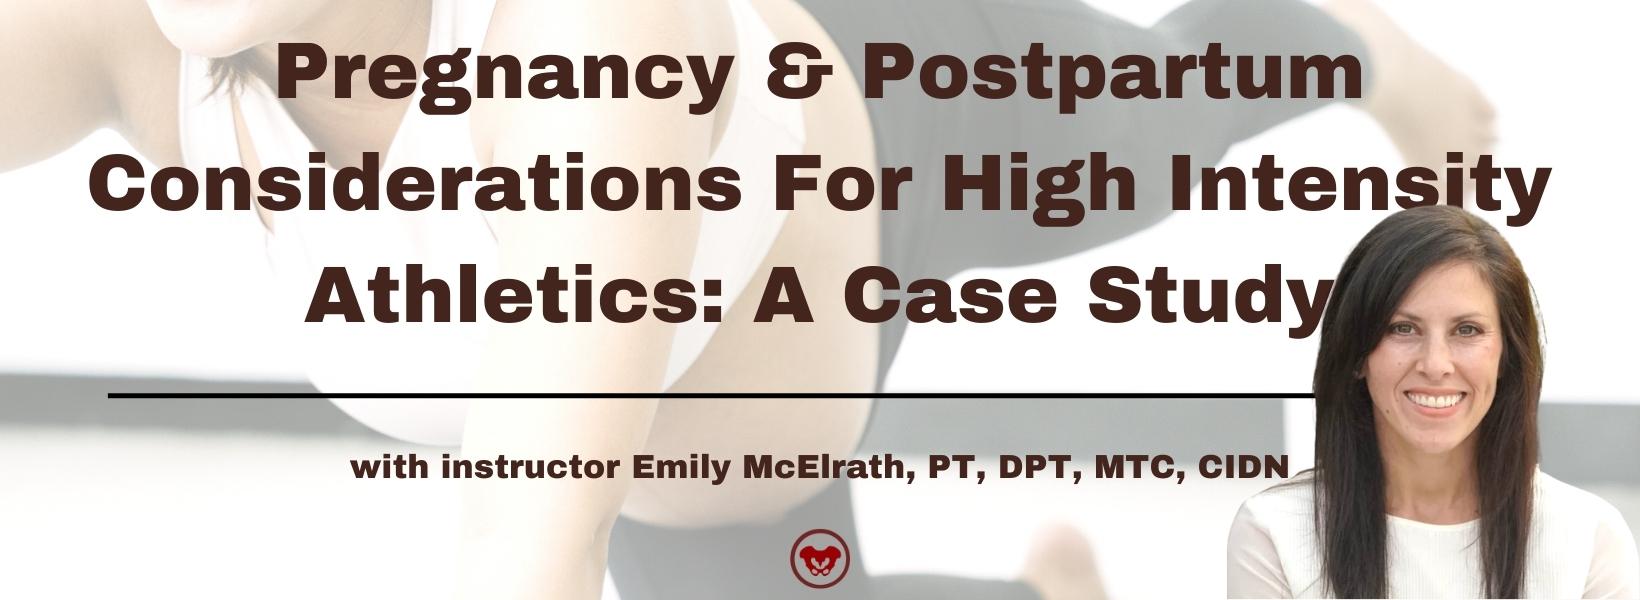 Pregnancy & Postpartum Considerations For High Intensity Athletics: A Case Study